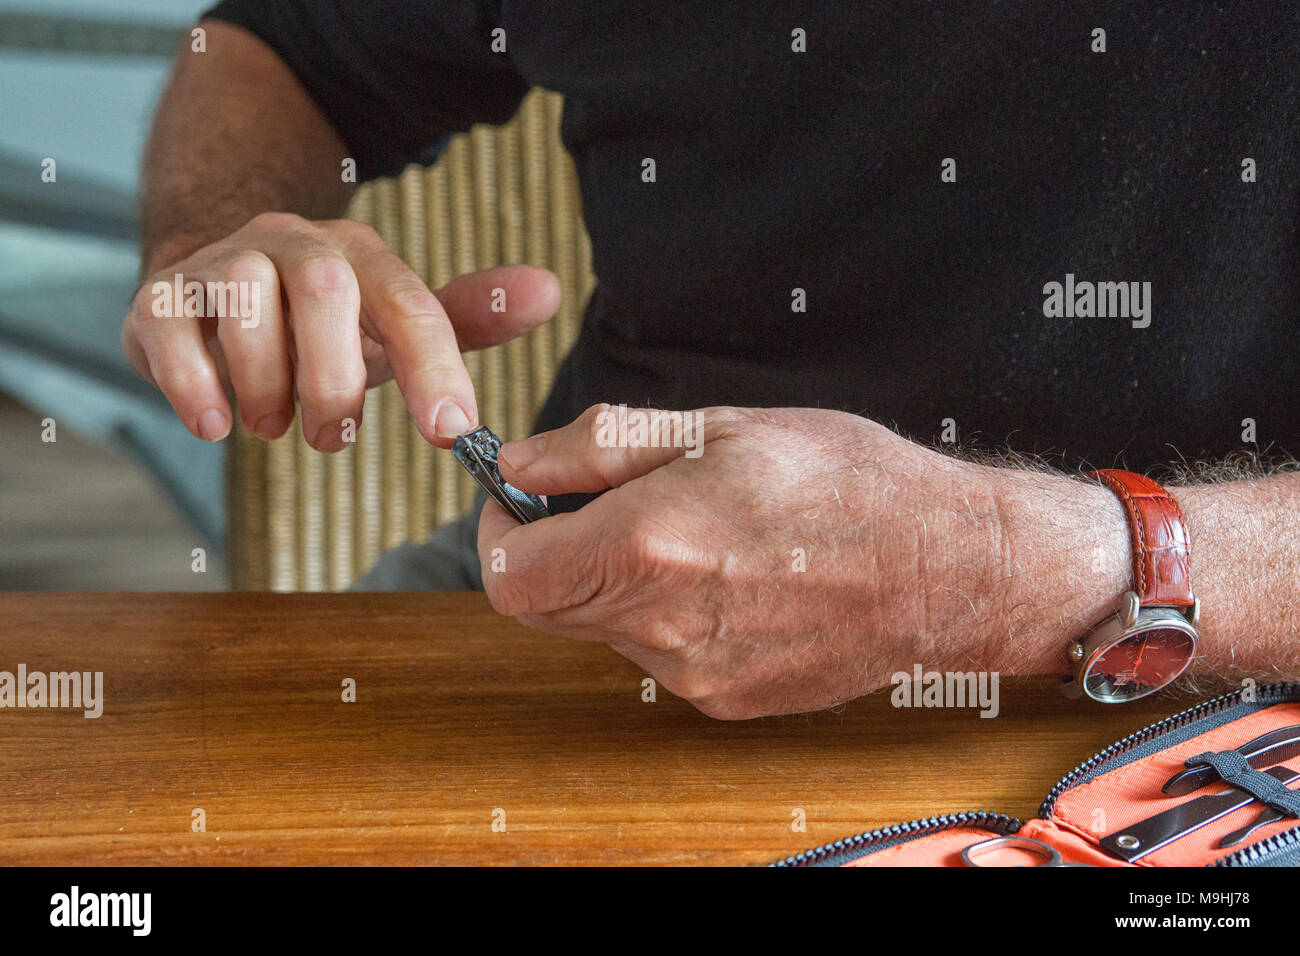 Man cutting fingernails with a nail clipper Stock Photo